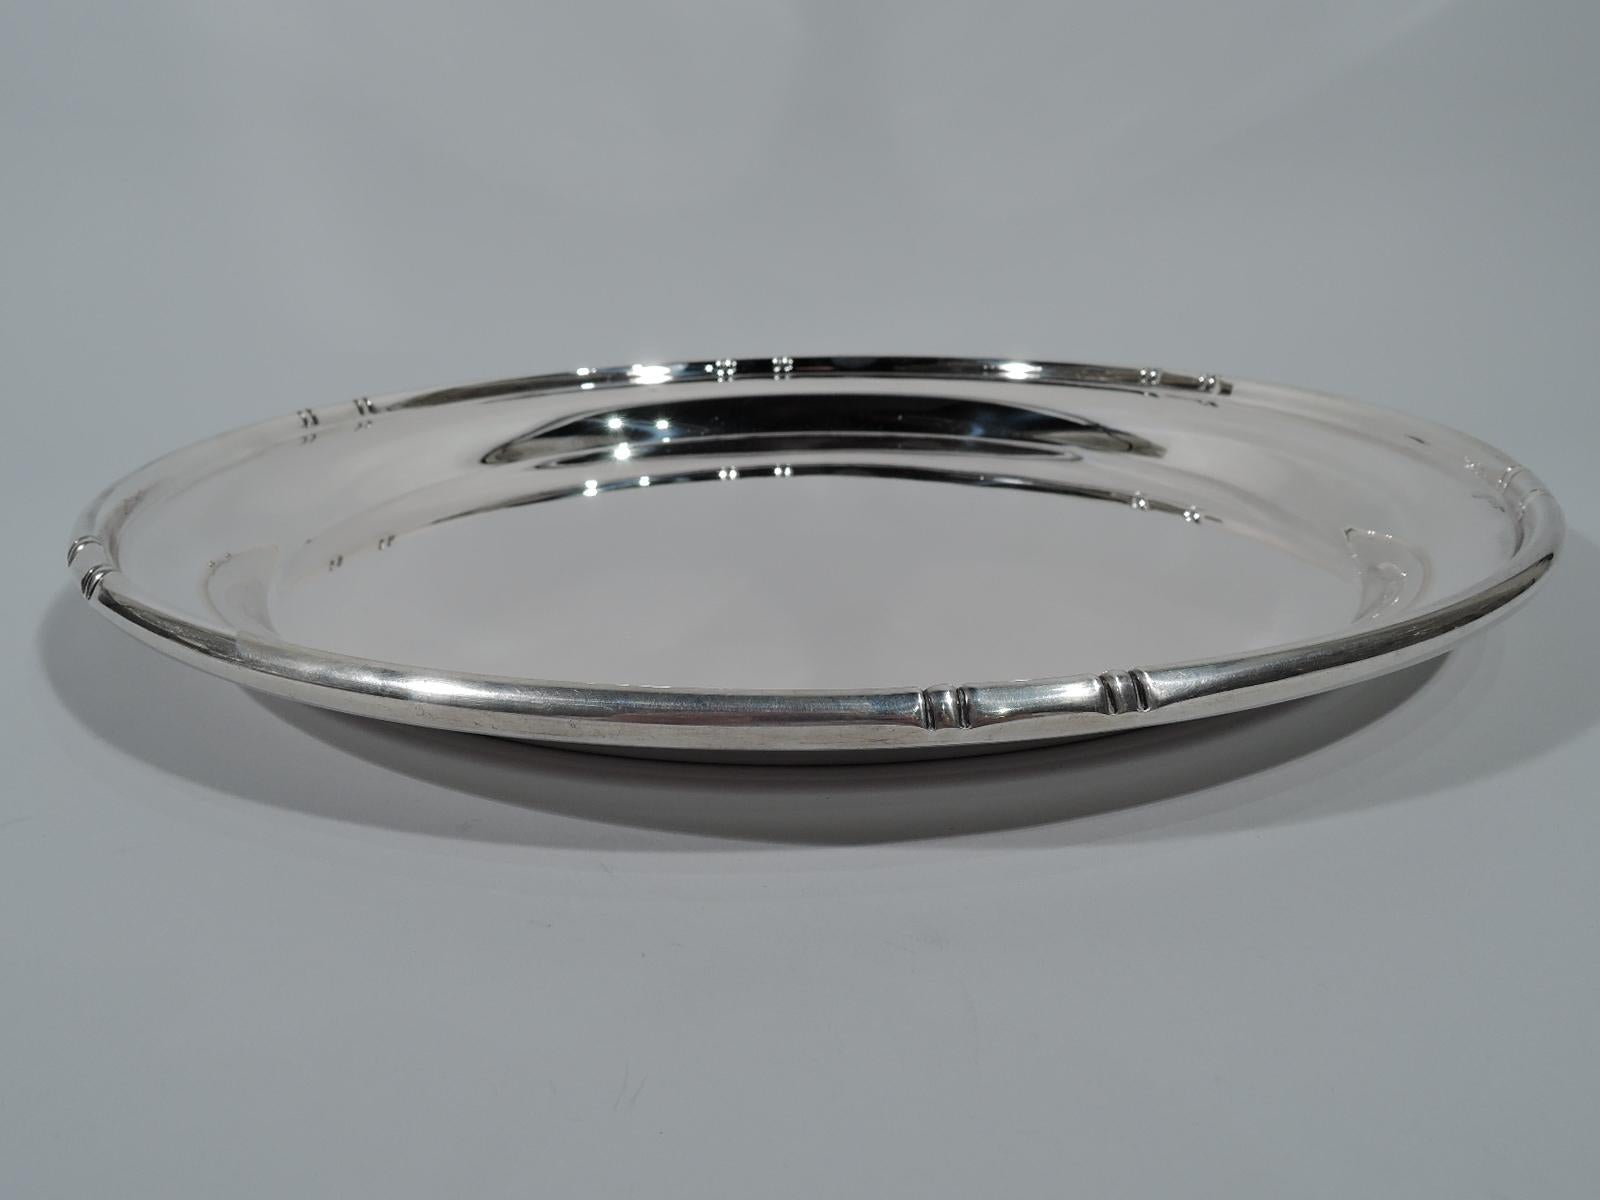 Modern sterling silver tray in Bamboo pattern. Retailed by Cartier in New York. Circular with notched bamboo-style rim. This pattern made by Baldwin & Miller in Newark. Fully marked including retailer’s stamp, pattern name, and no. 975. Weight: 31